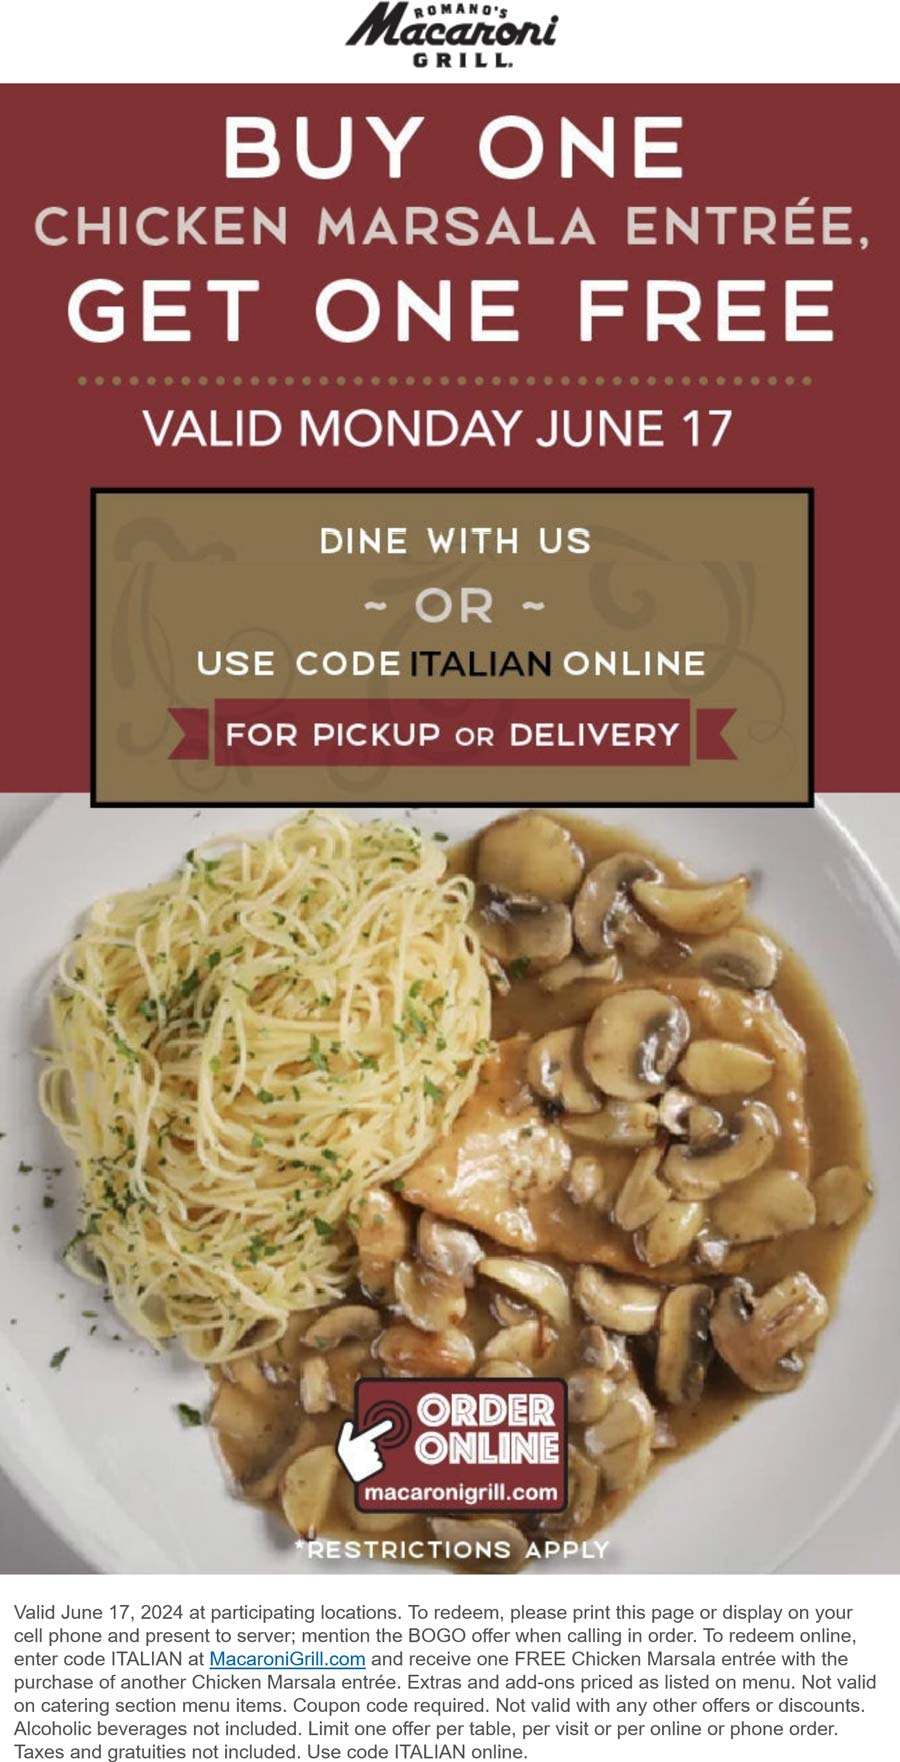 Macaroni Grill restaurants Coupon  Second chicken marsala entree free today at Macaroni Grill #macaronigrill 